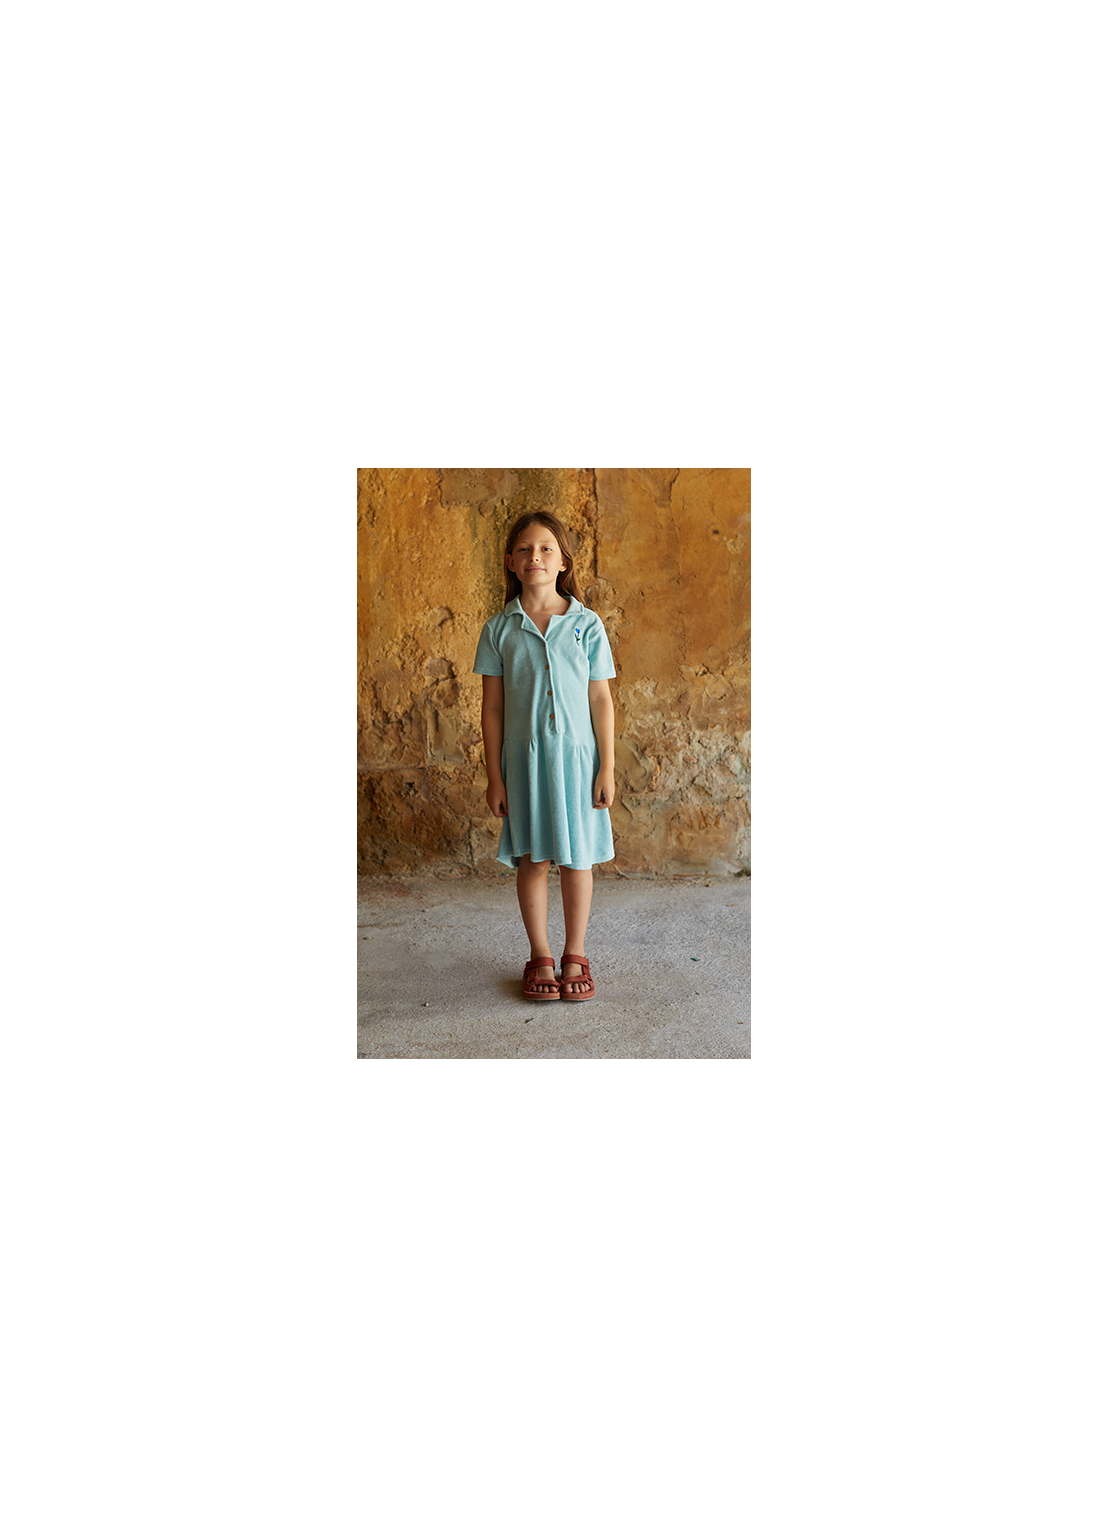 Kid  DRESS Girl- 100%  Cotton- Knitted